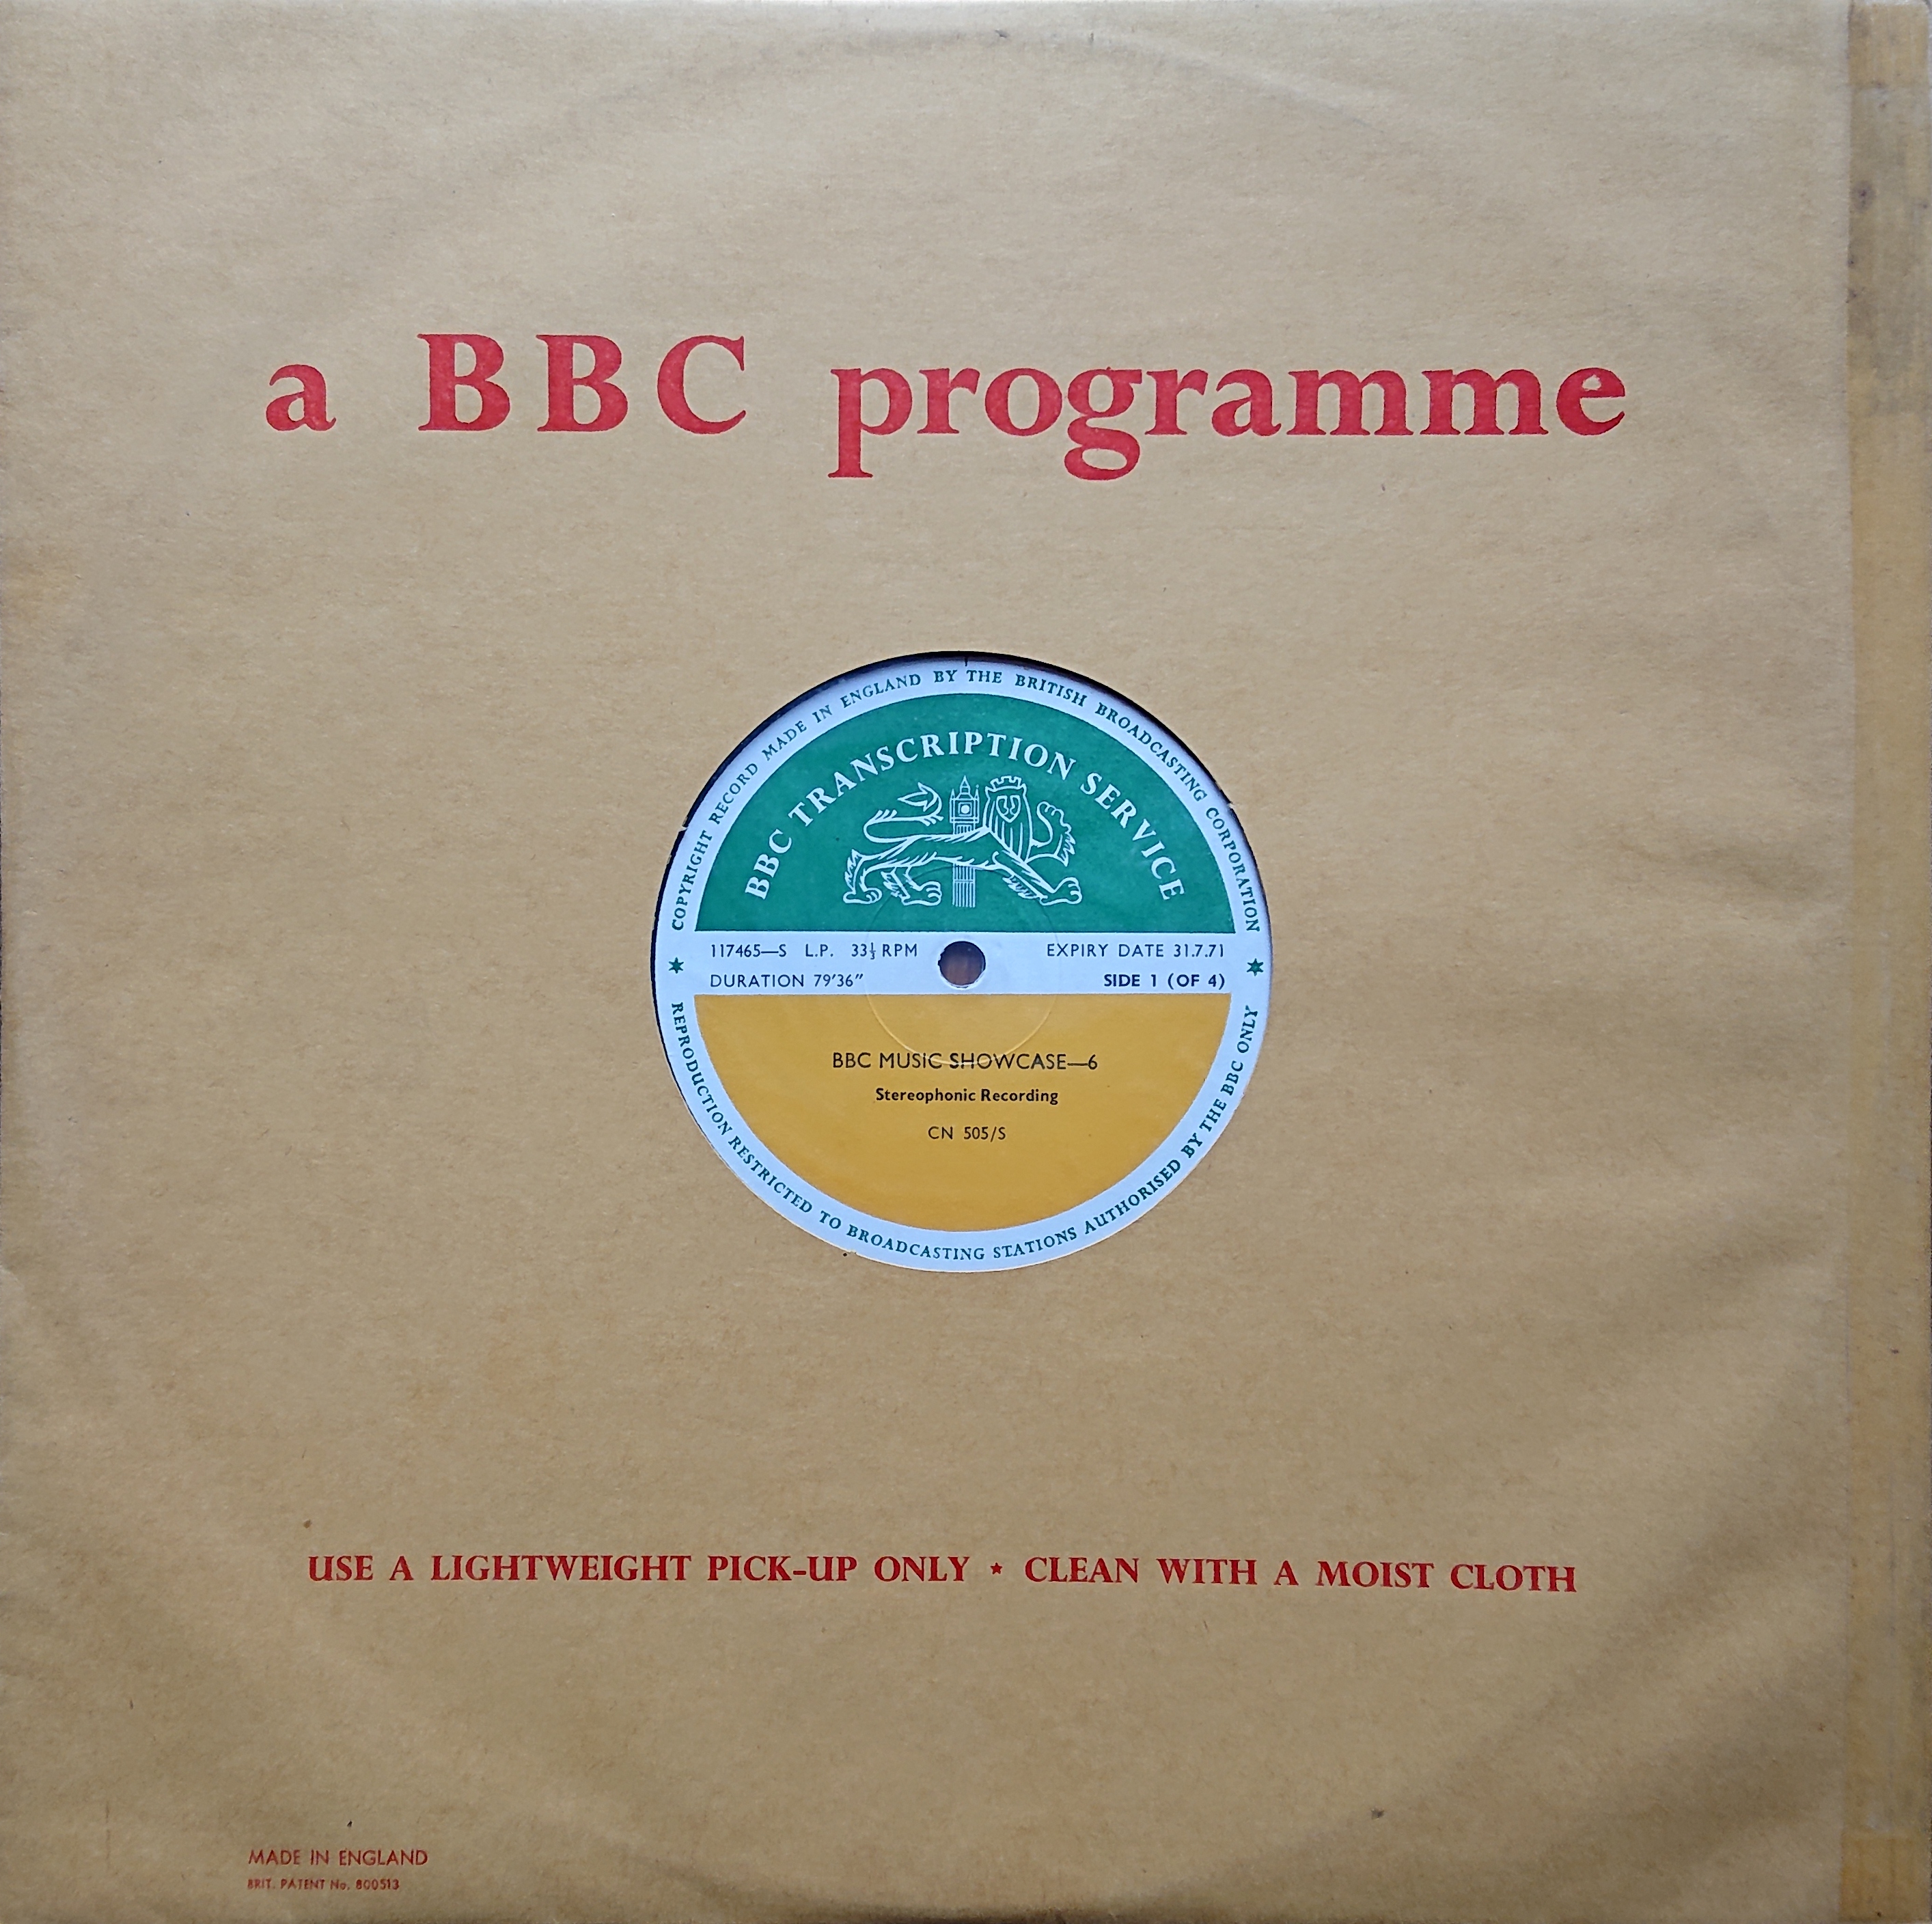 Picture of CN 505 S 11 BBC music showcase - 6 (Sides 1 & 3) by artist Various from the BBC albums - Records and Tapes library